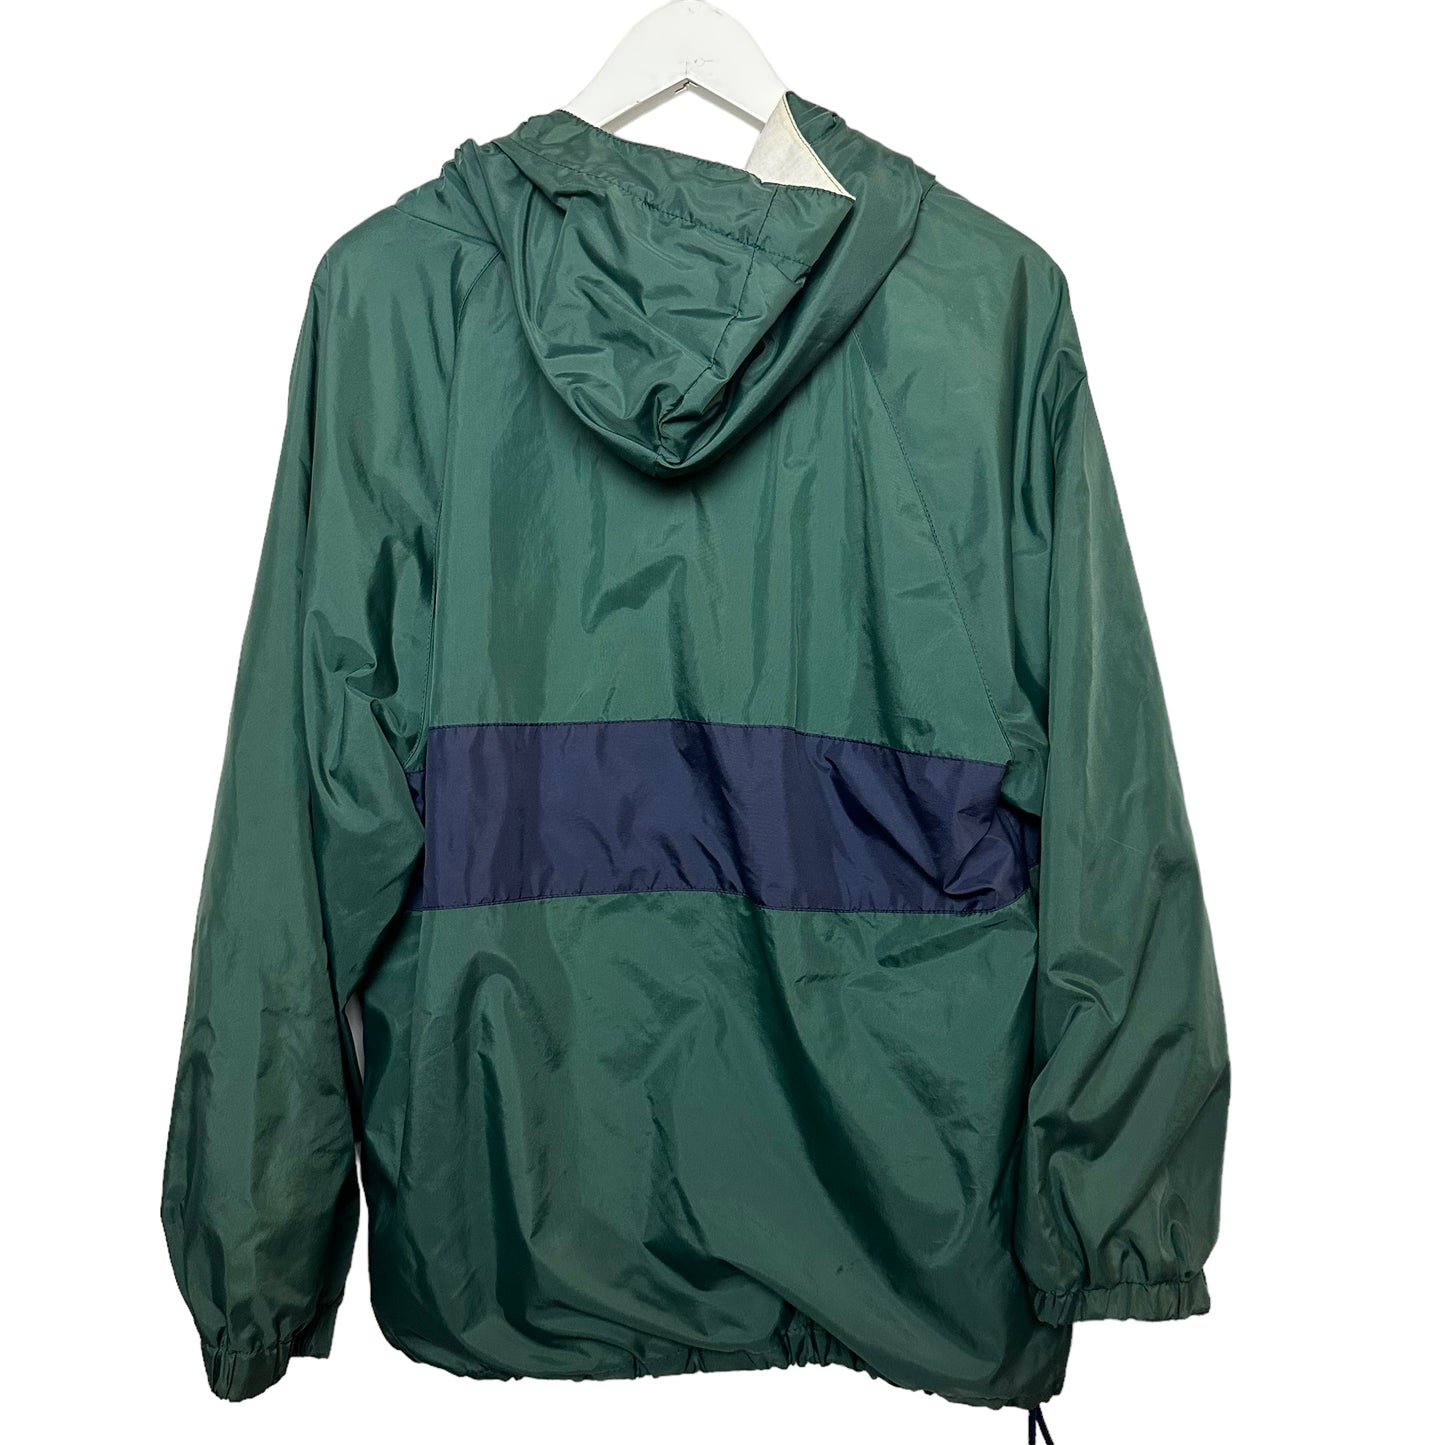 Charles River Ohio University Pullover Windbreaker Navy Blue and Green Color Block XL